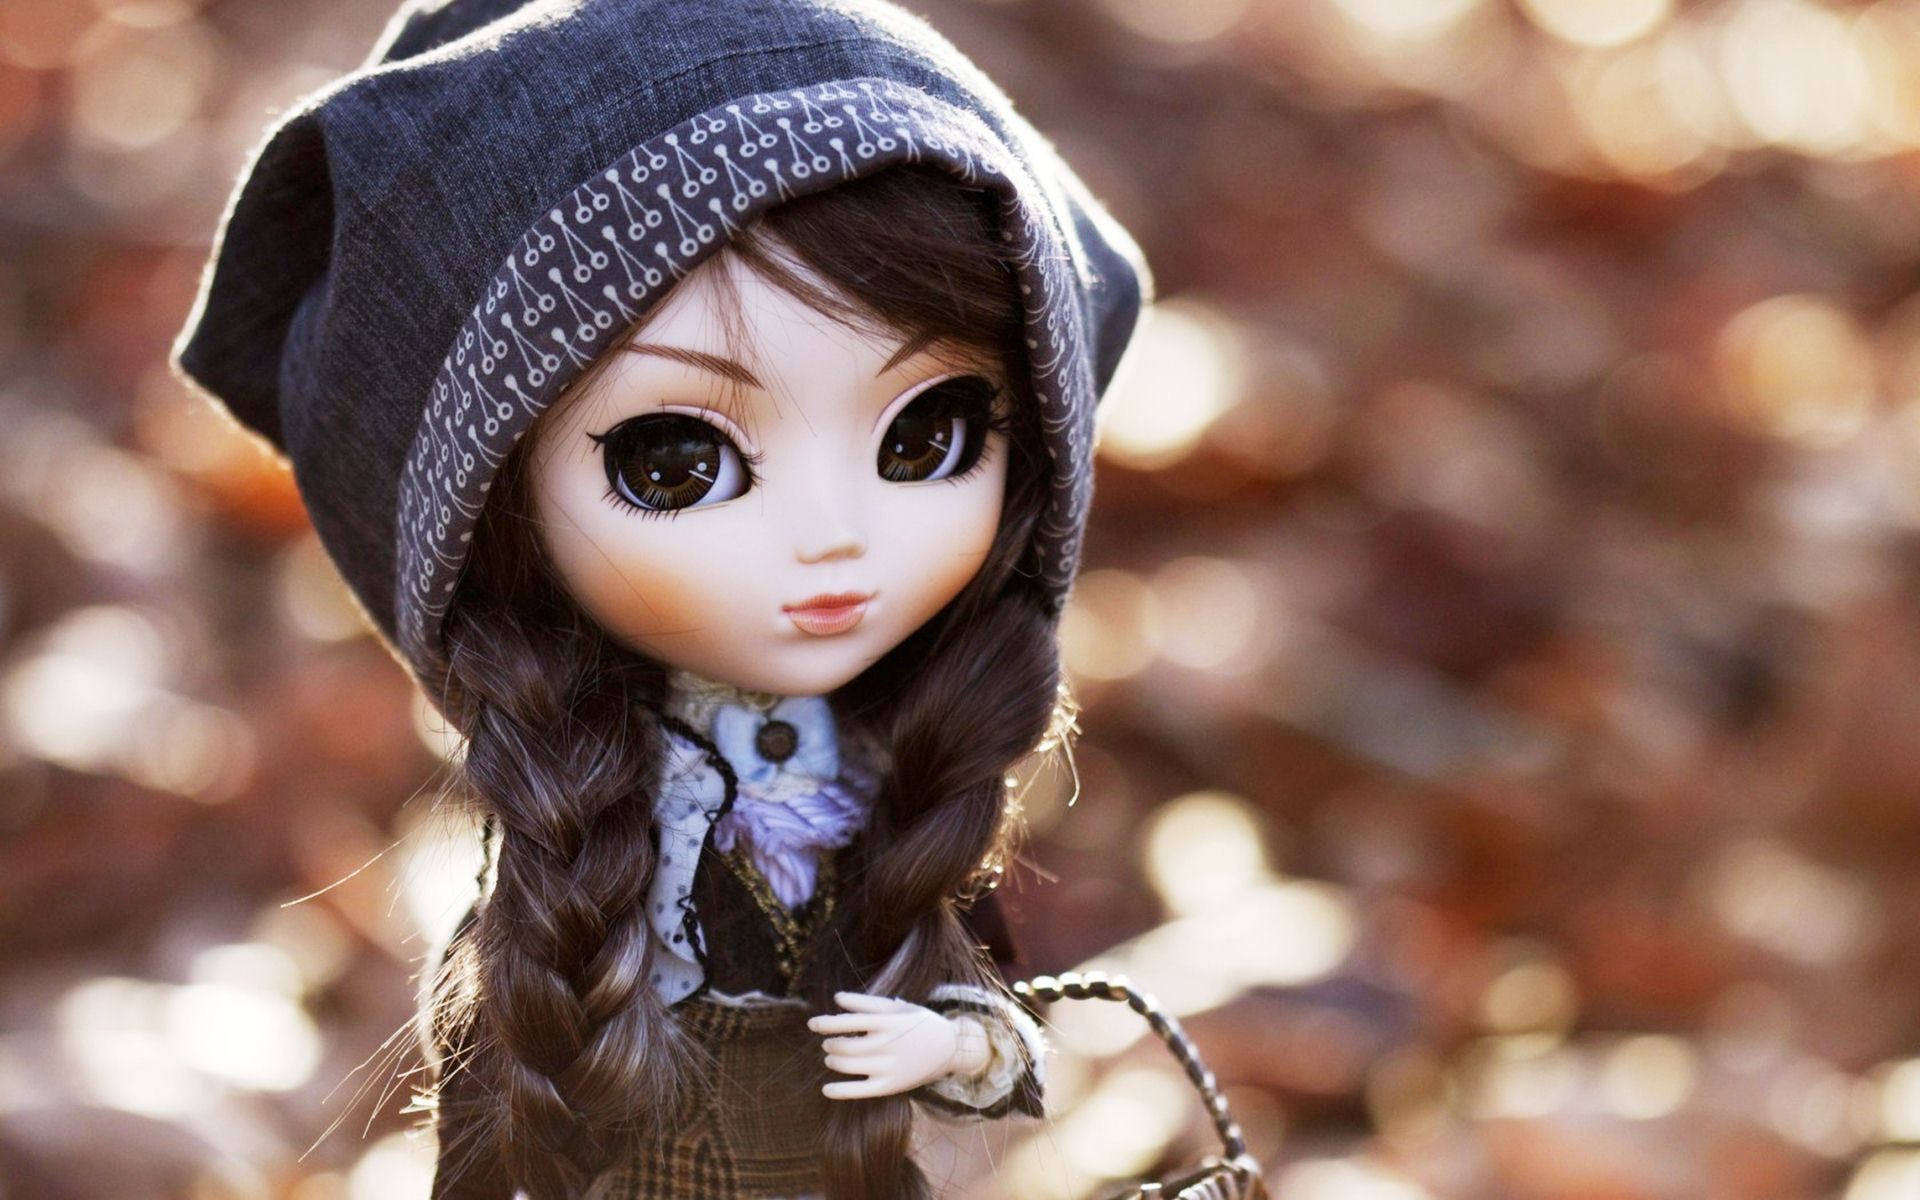 Dolls Hd Wallpapers Free Download › Unique Hdq Cover - Cute Dolls Wallpaper  Hd - 1920x1200 Wallpaper 